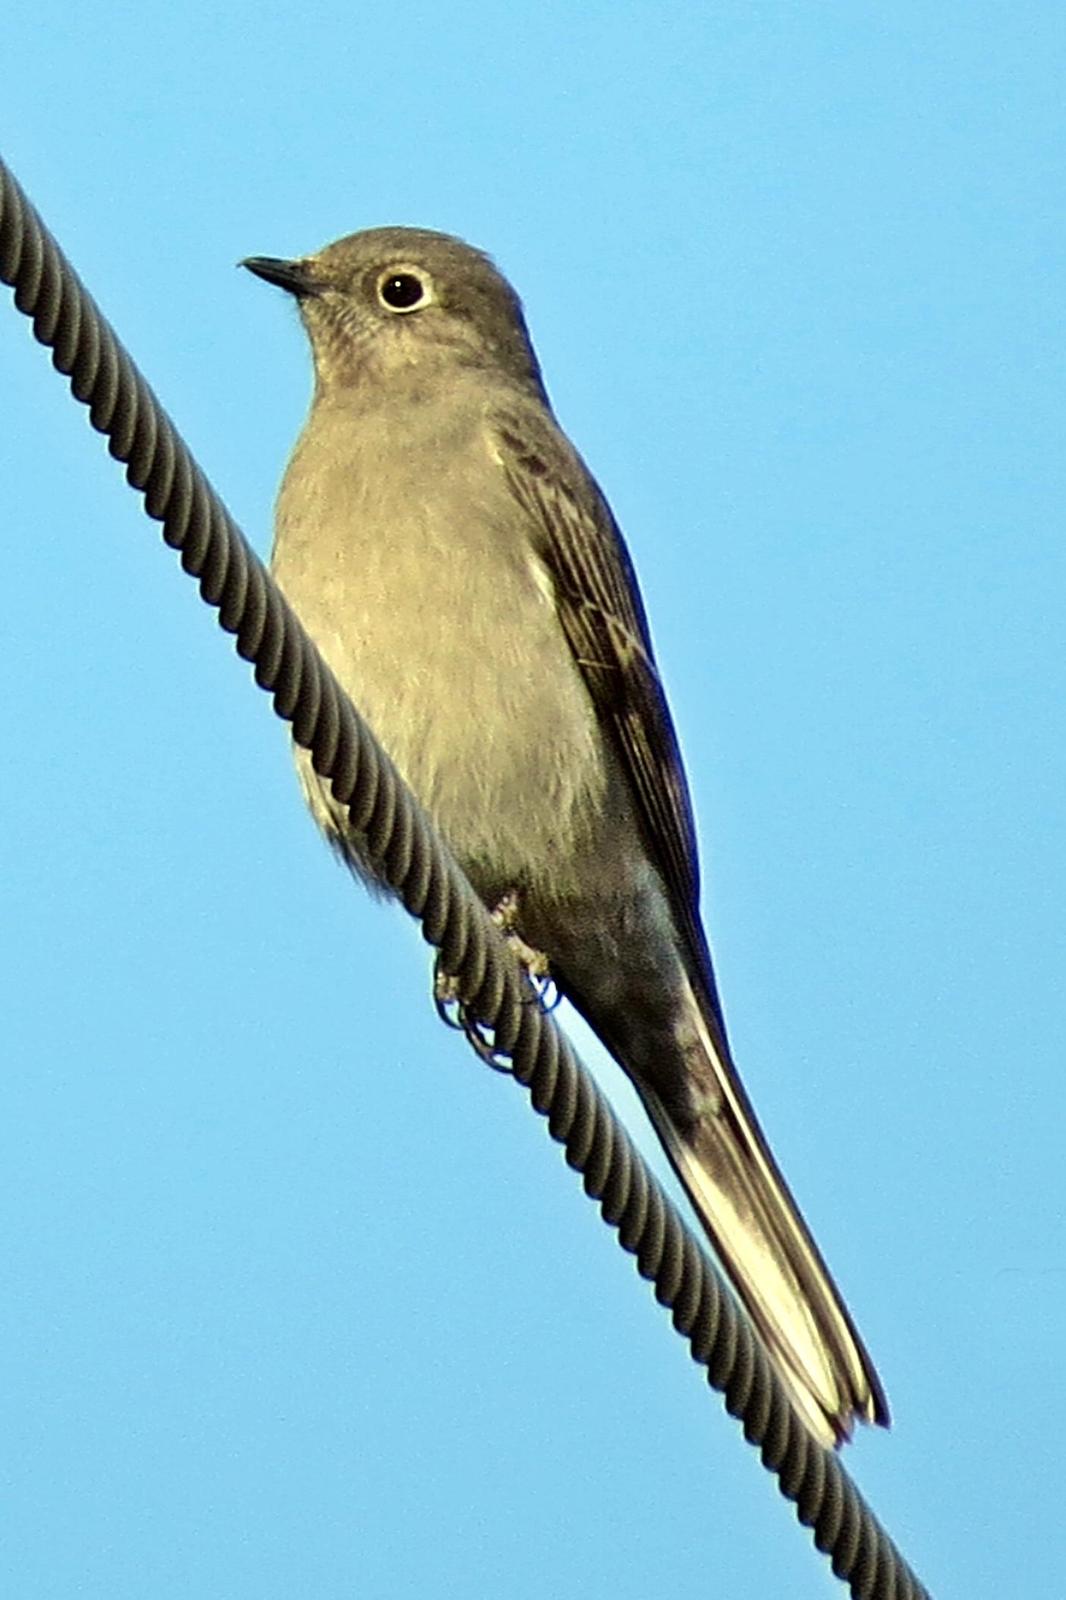 Townsend's Solitaire Photo by Bob Neugebauer